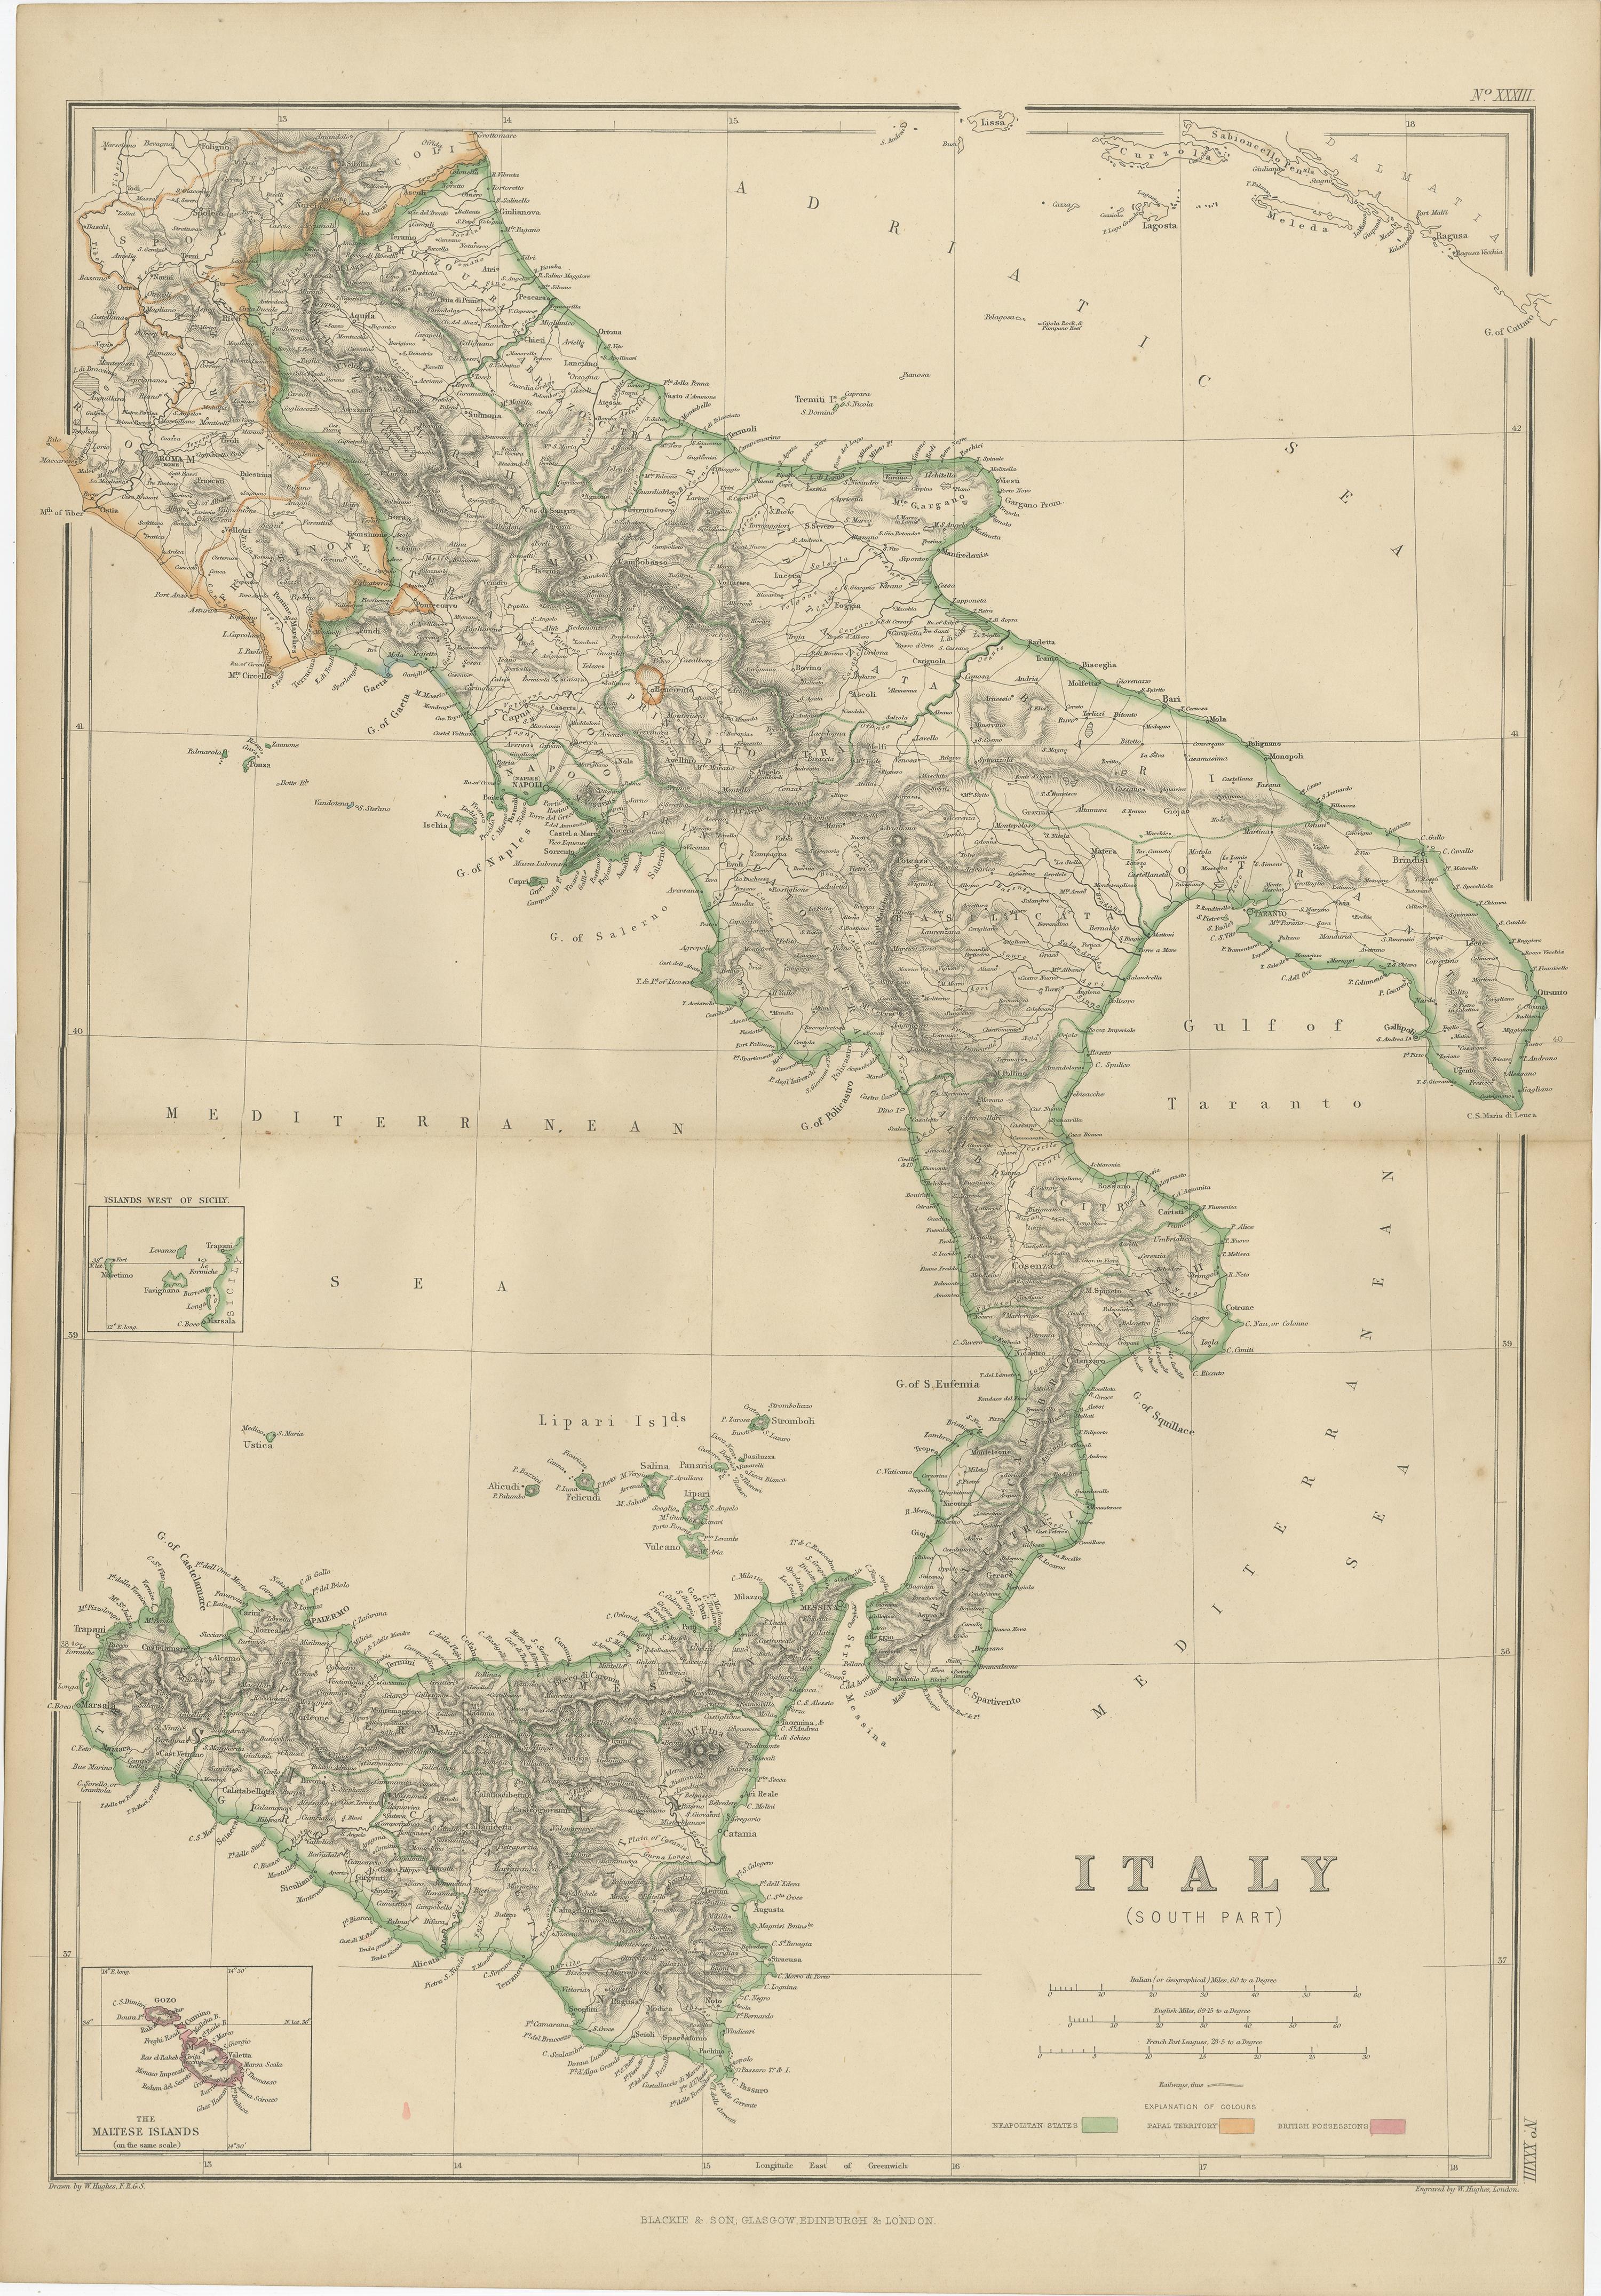 Paper Antique Map of Italy, South Part, by W. G. Blackie, 1859